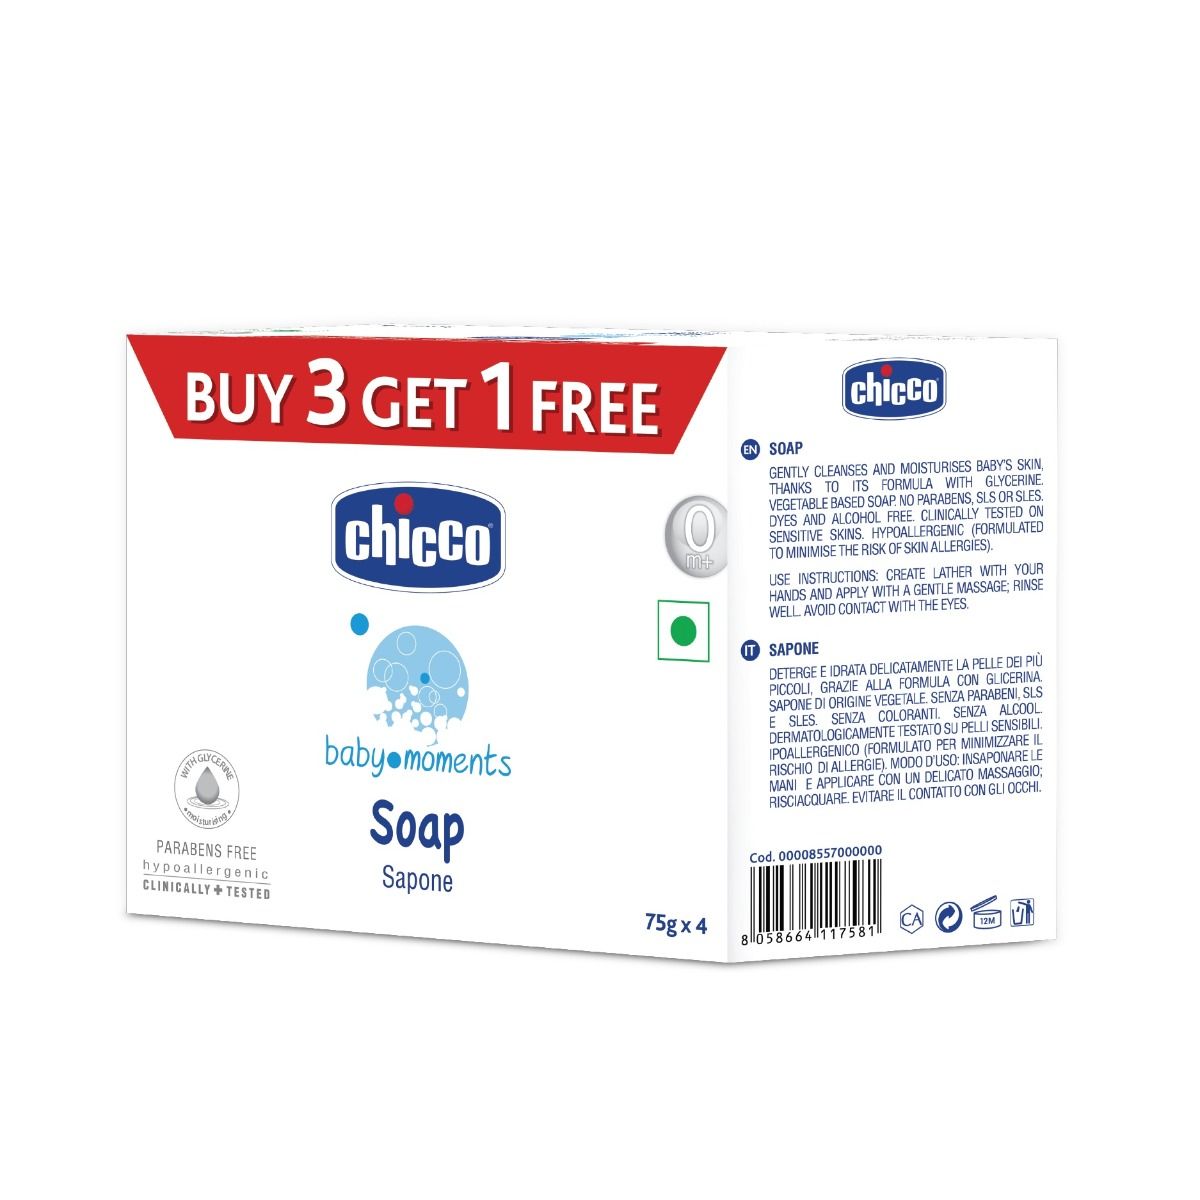 Chicco Baby Moments Soap, 75 gm (Buy 3, Get 1 Free), Pack of 1 